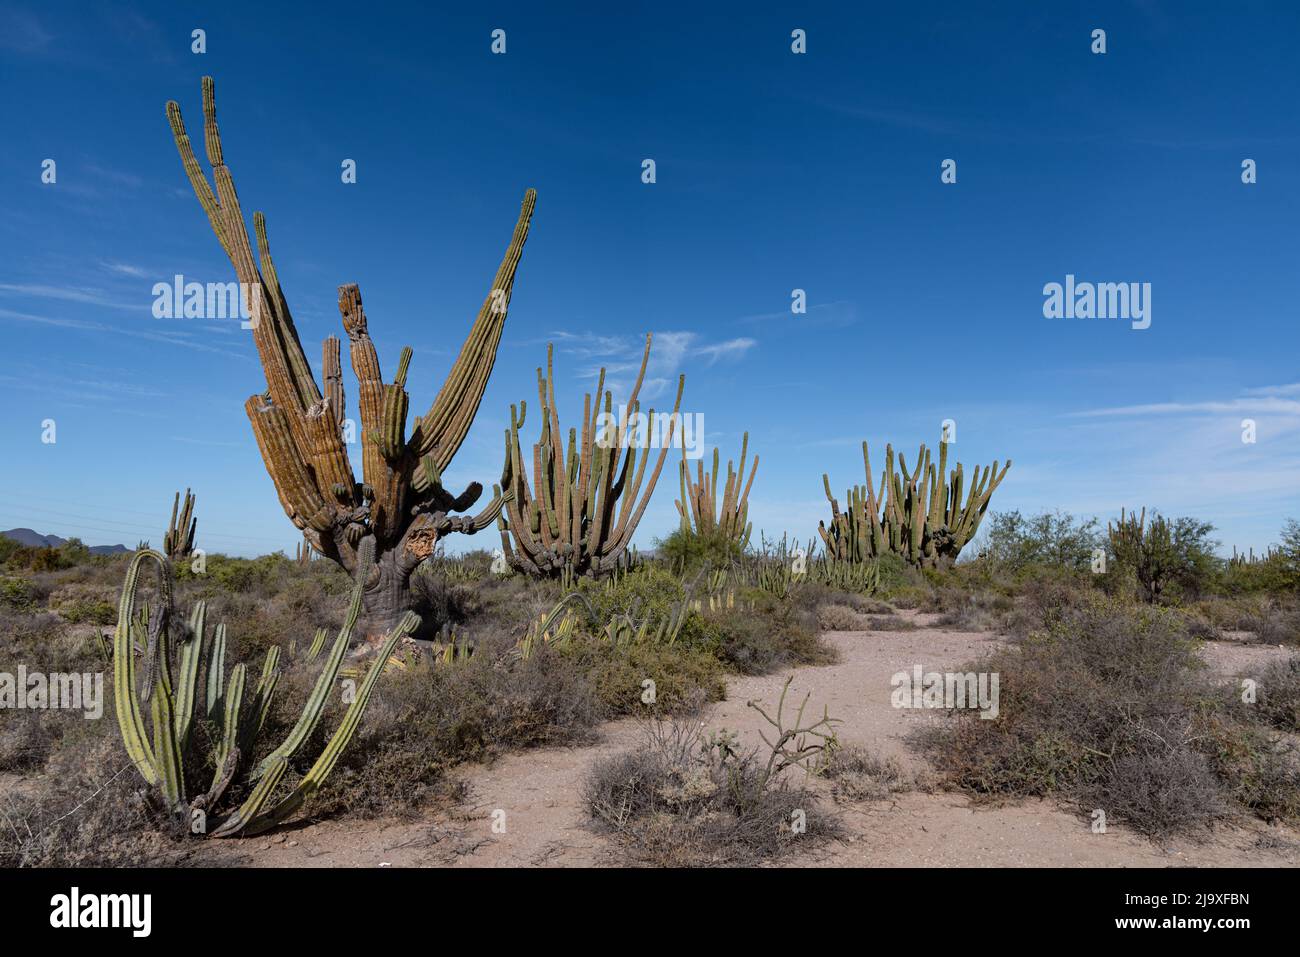 Mexican Giant Cardon in the Sonoran Desert, Northern Mexico. Stock Photo